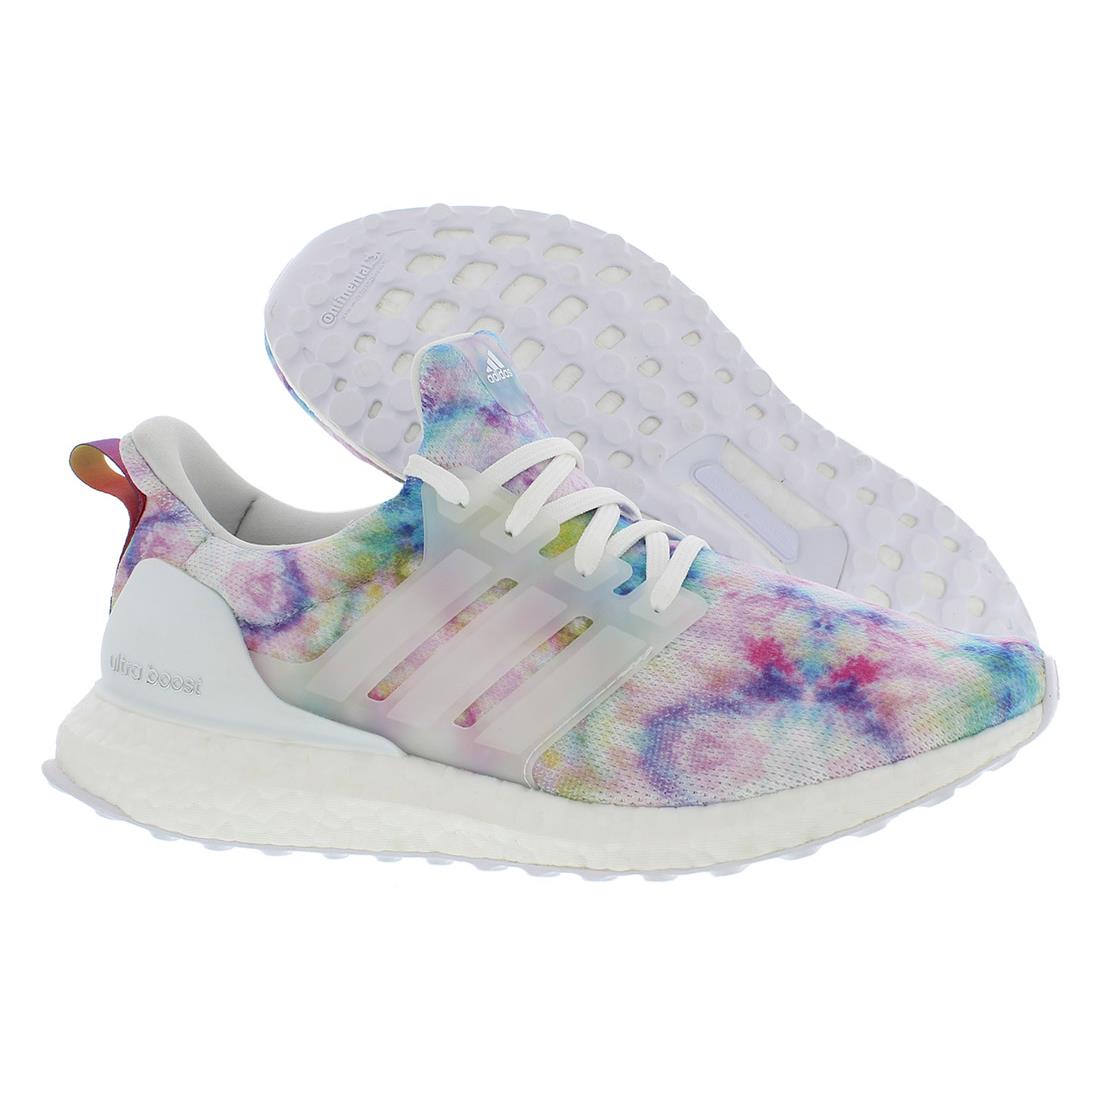 Adidas Ultraboost 4.0 Dna Womens Shoes Multi-Colored